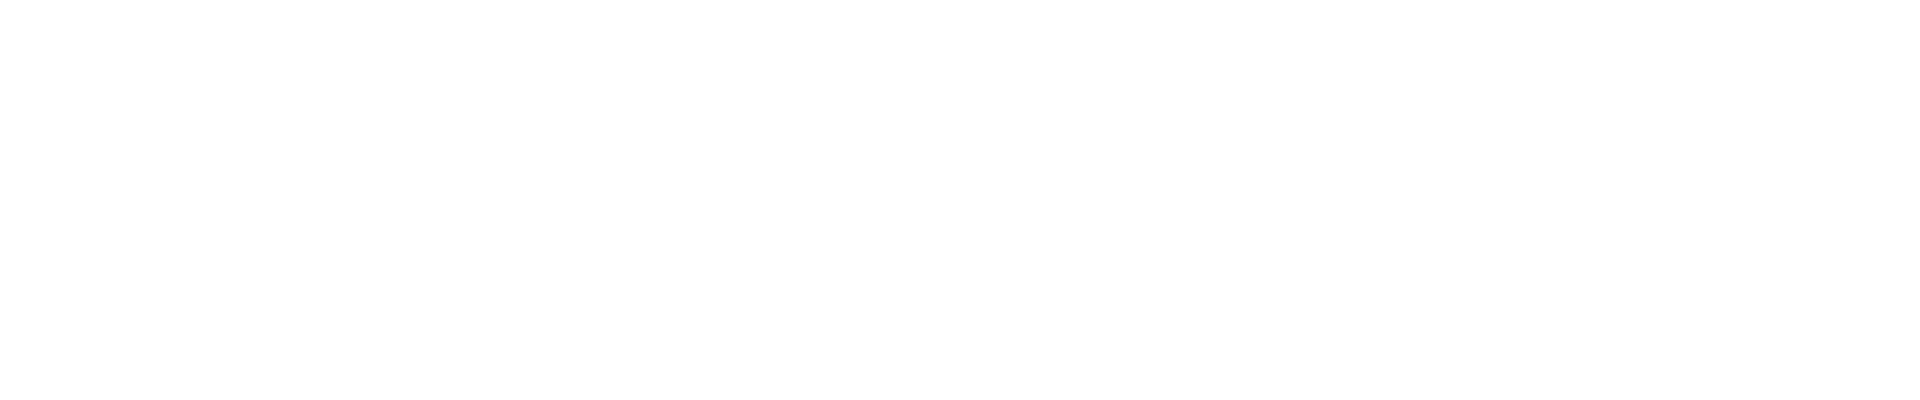 bANNER字.png